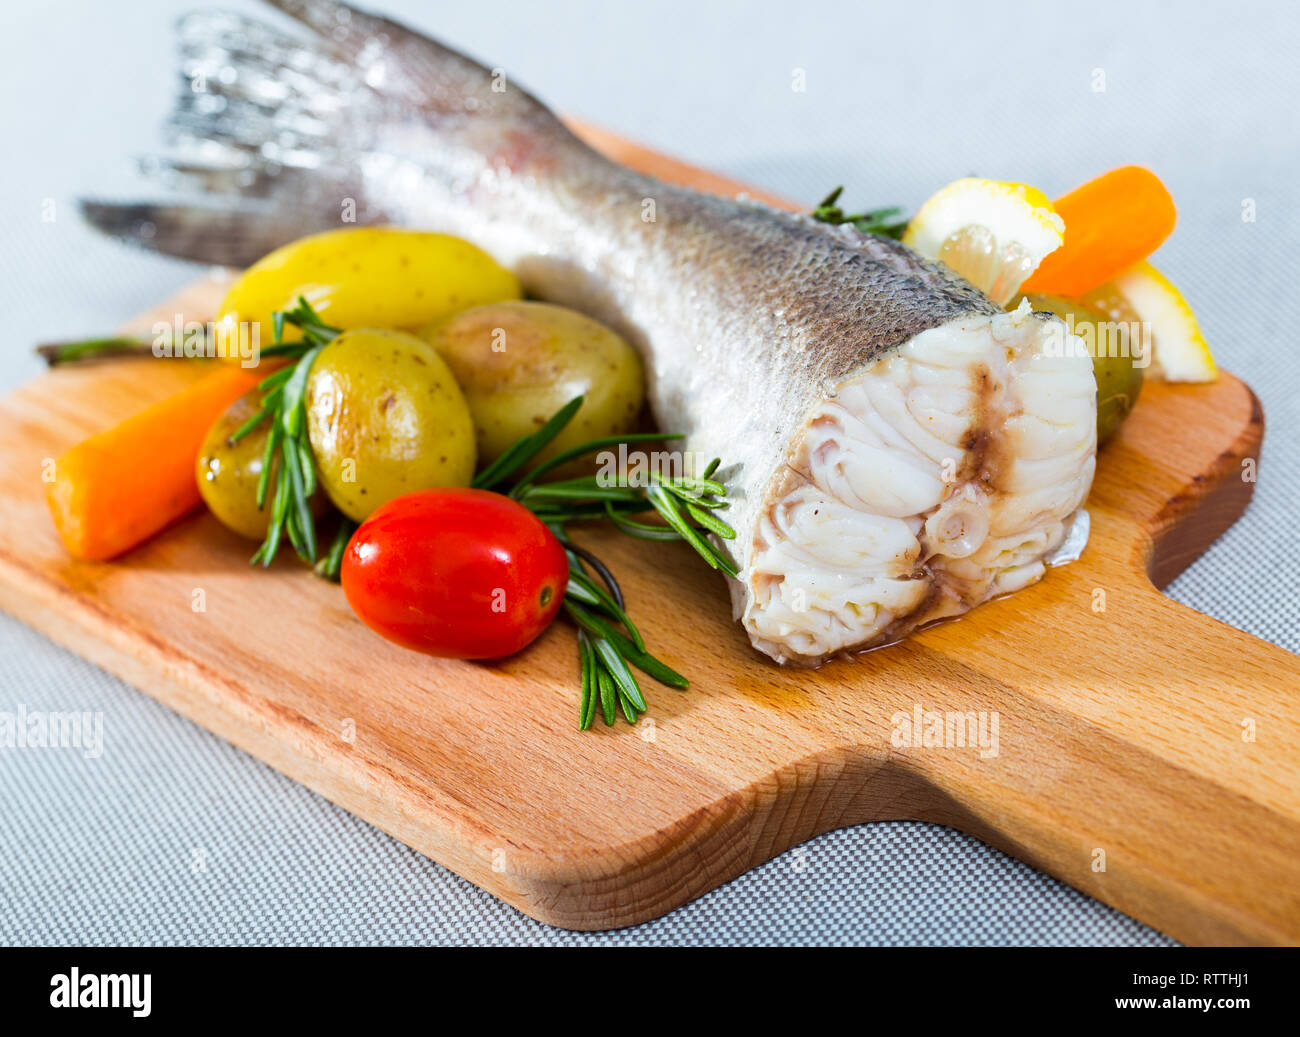 Baked hake tail with vegetables recipe - 250g hake or other cod-like ...